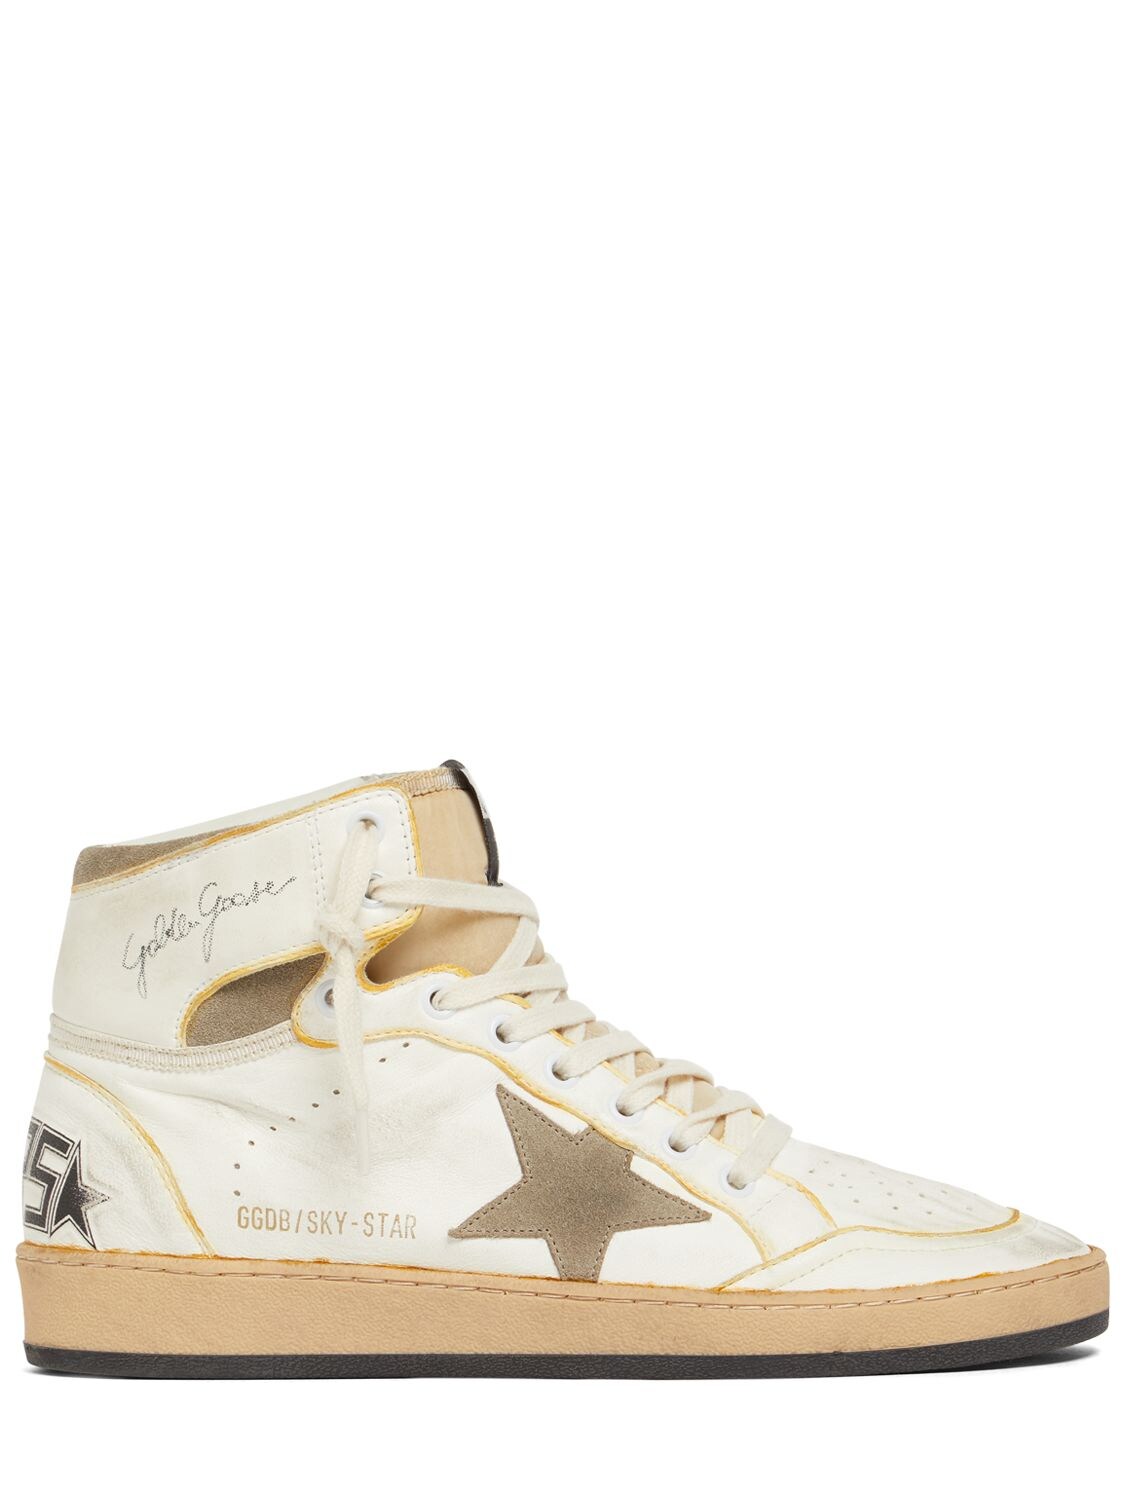 Golden Goose 20mm Sky Star Nappa Leather Sneakers In White,taupe | ModeSens